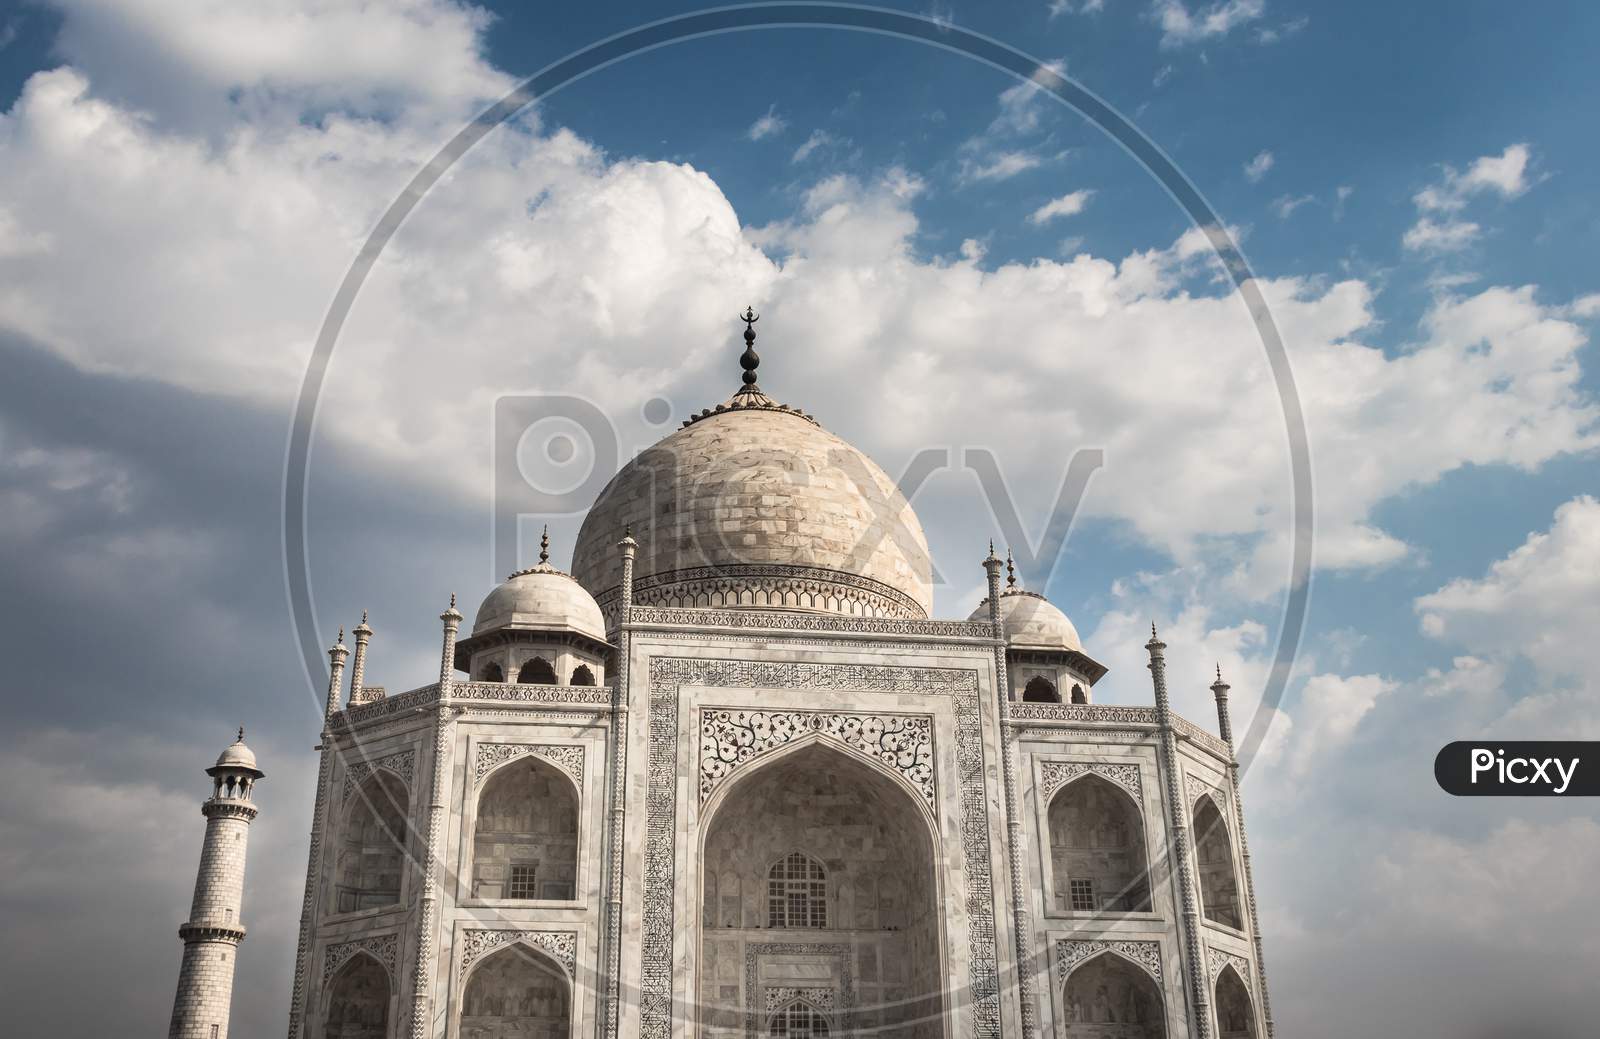 Tajmahal One Of The Seven Wonders Of World Image With Blue Sky Background